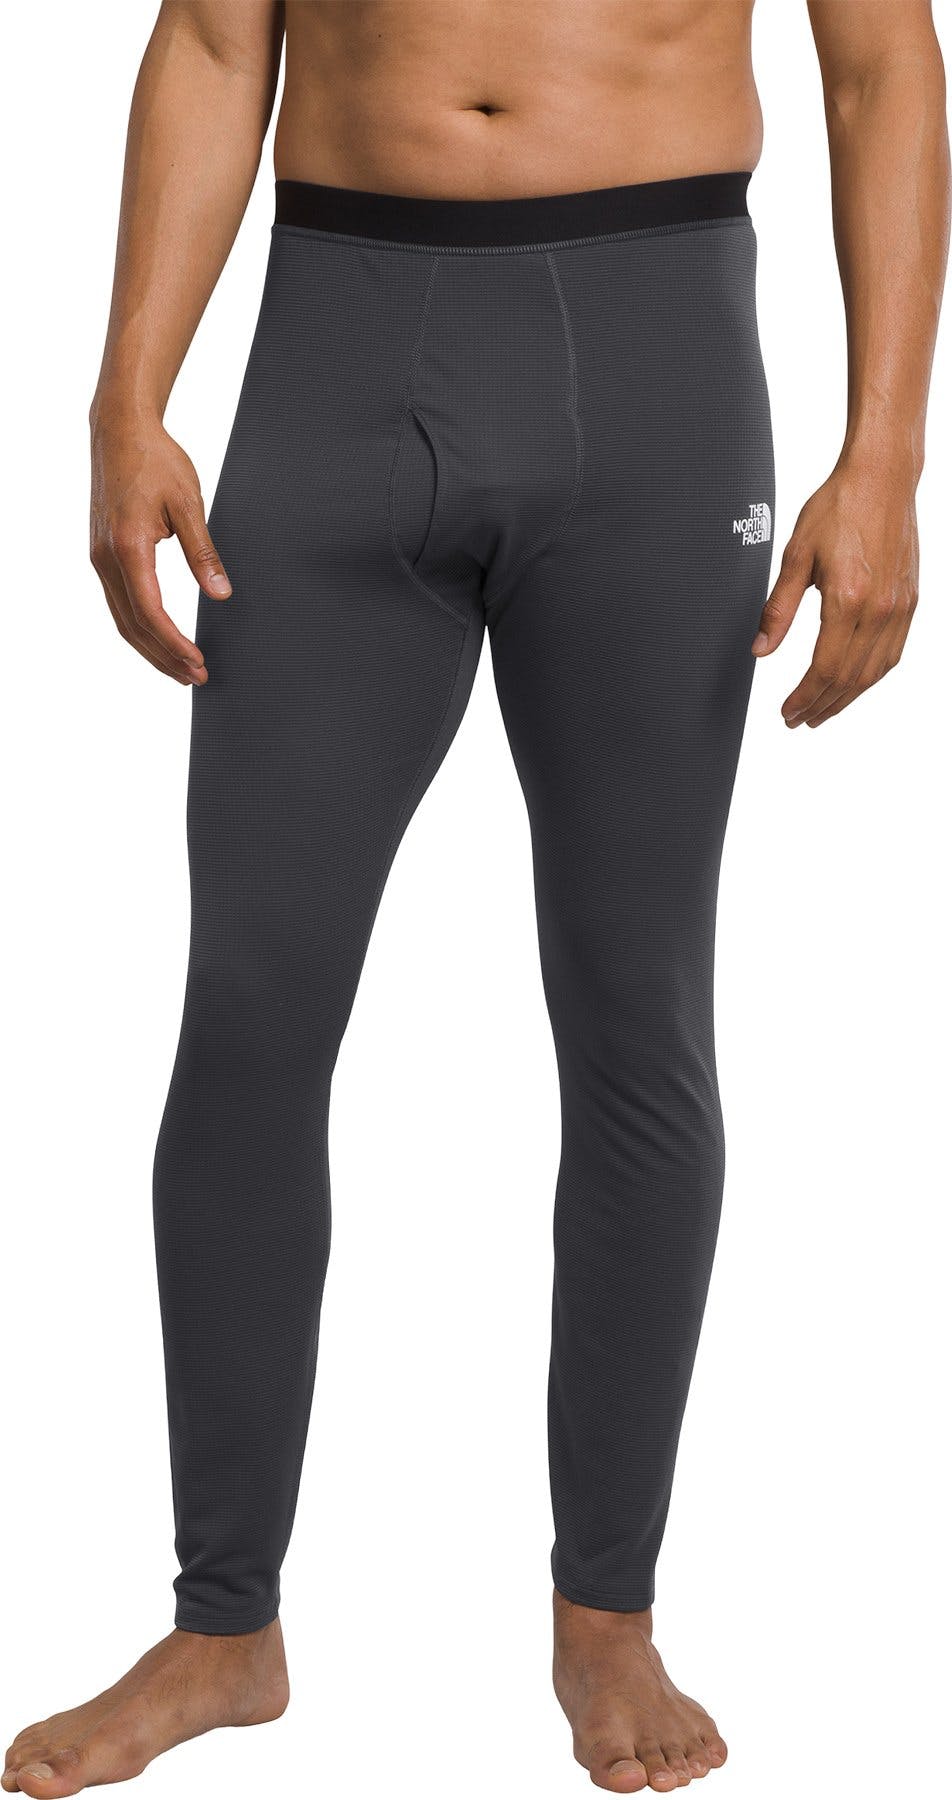 Product image for Fd Pro 160 Tight - Men’s